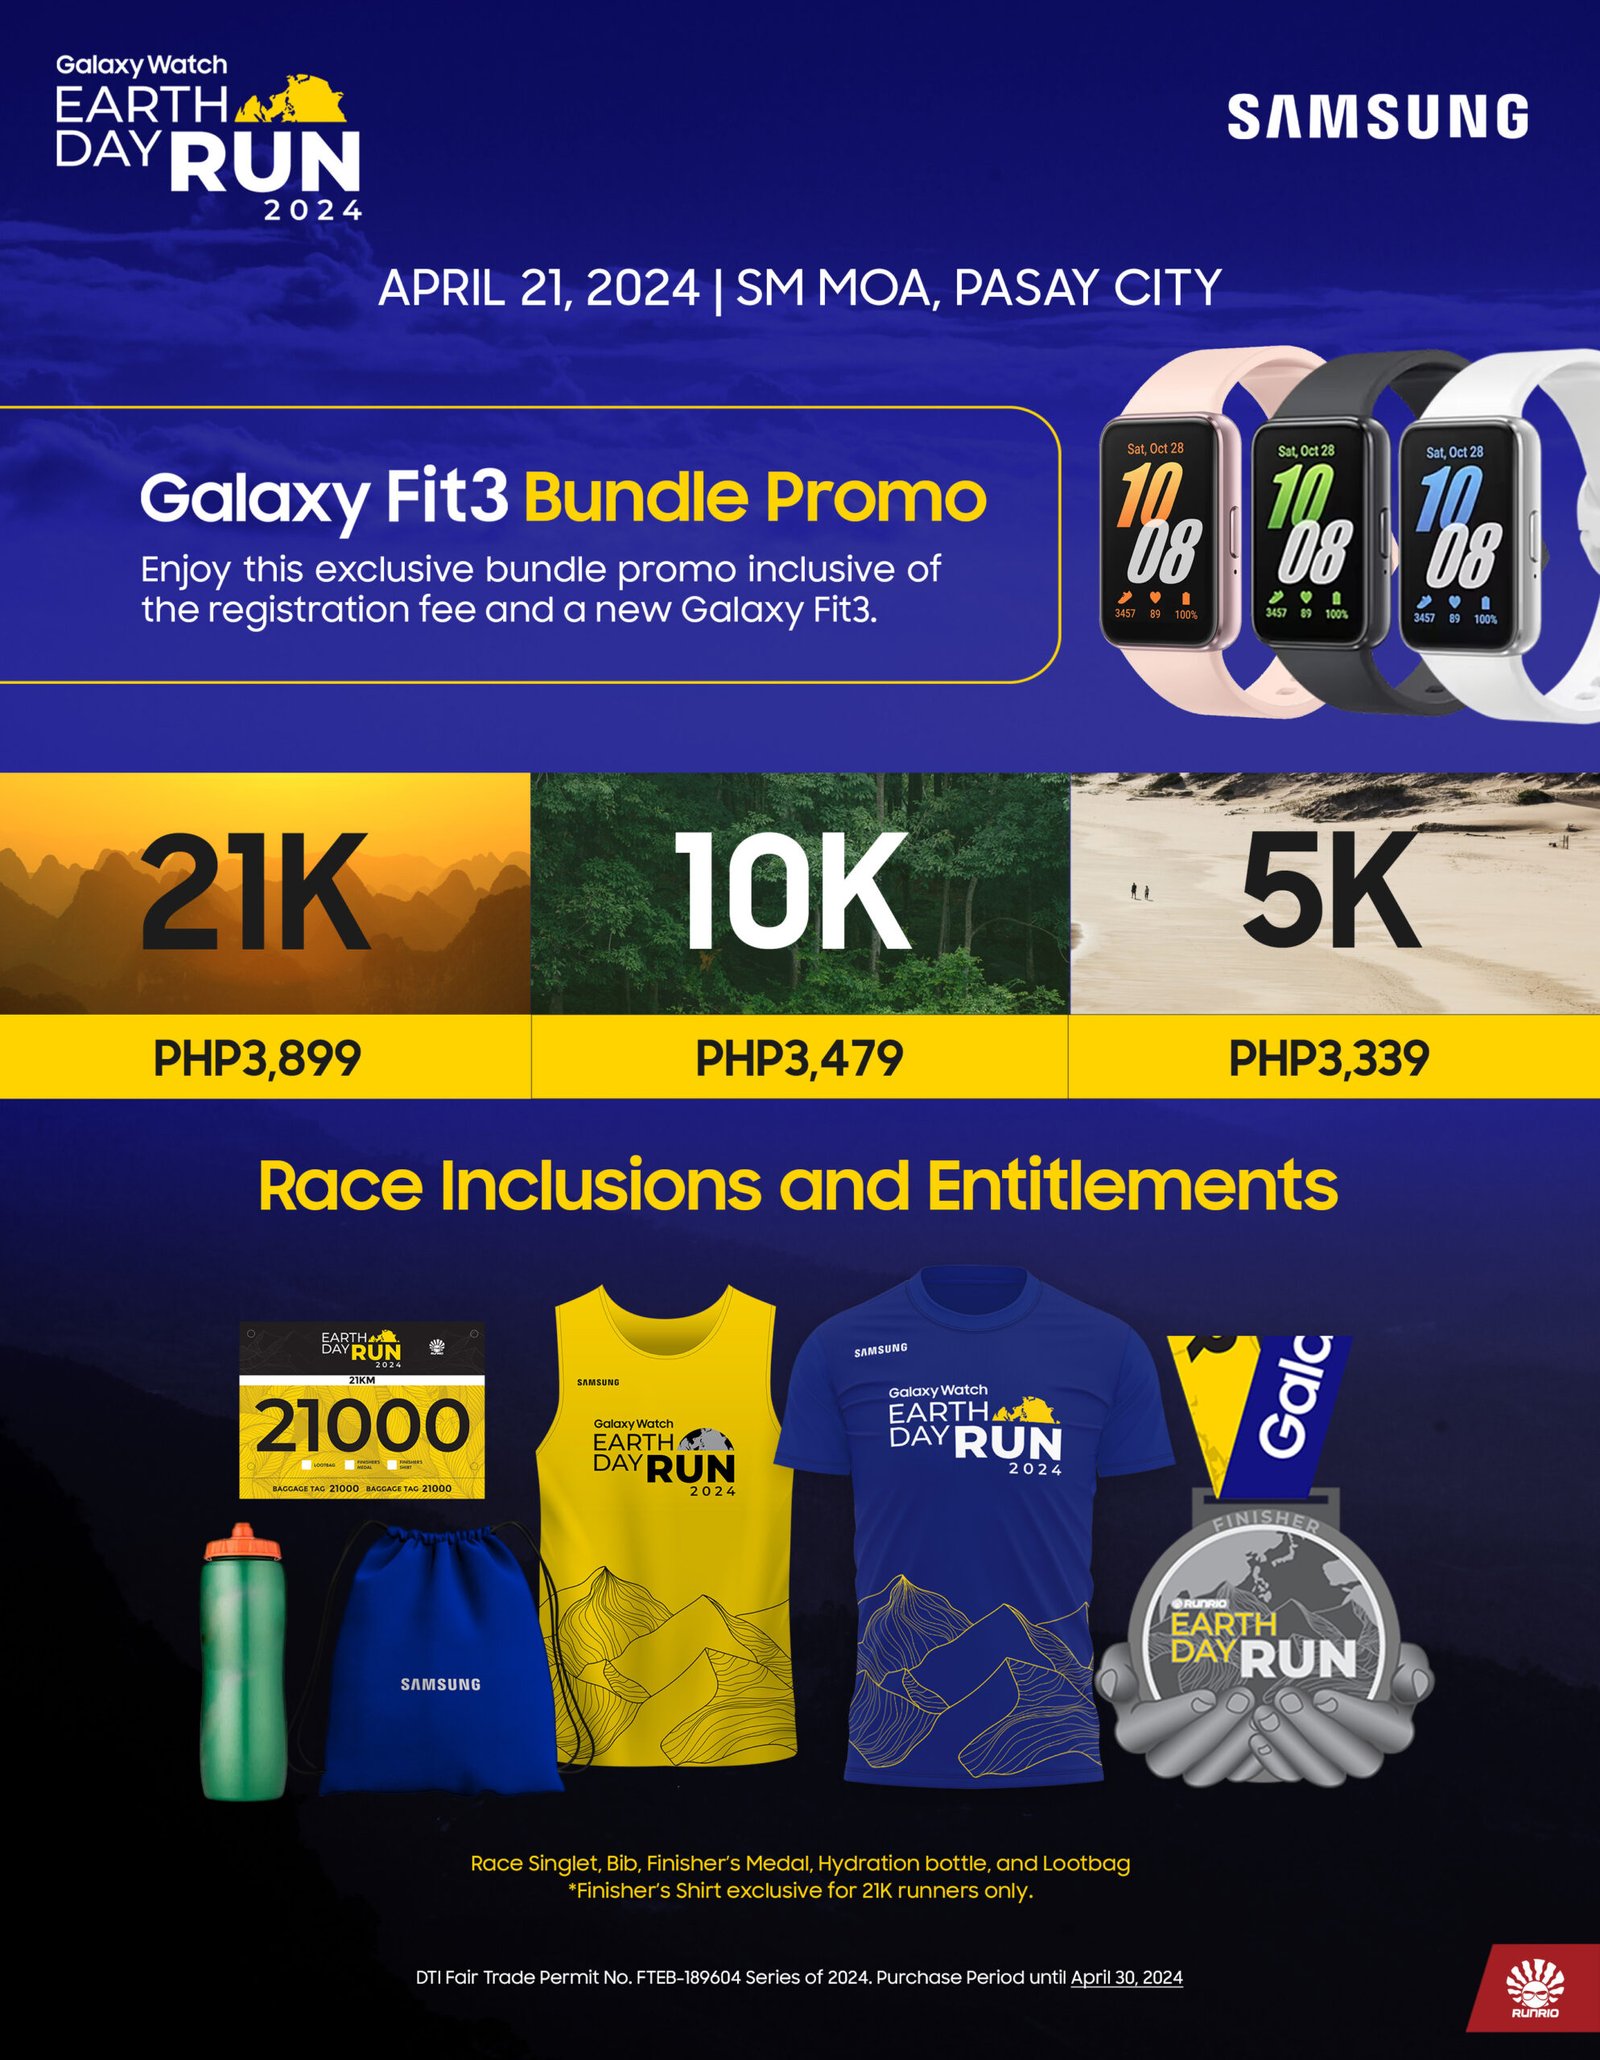 Run for a greener planet with Samsung at the Galaxy Watch Earth Day Run 2024